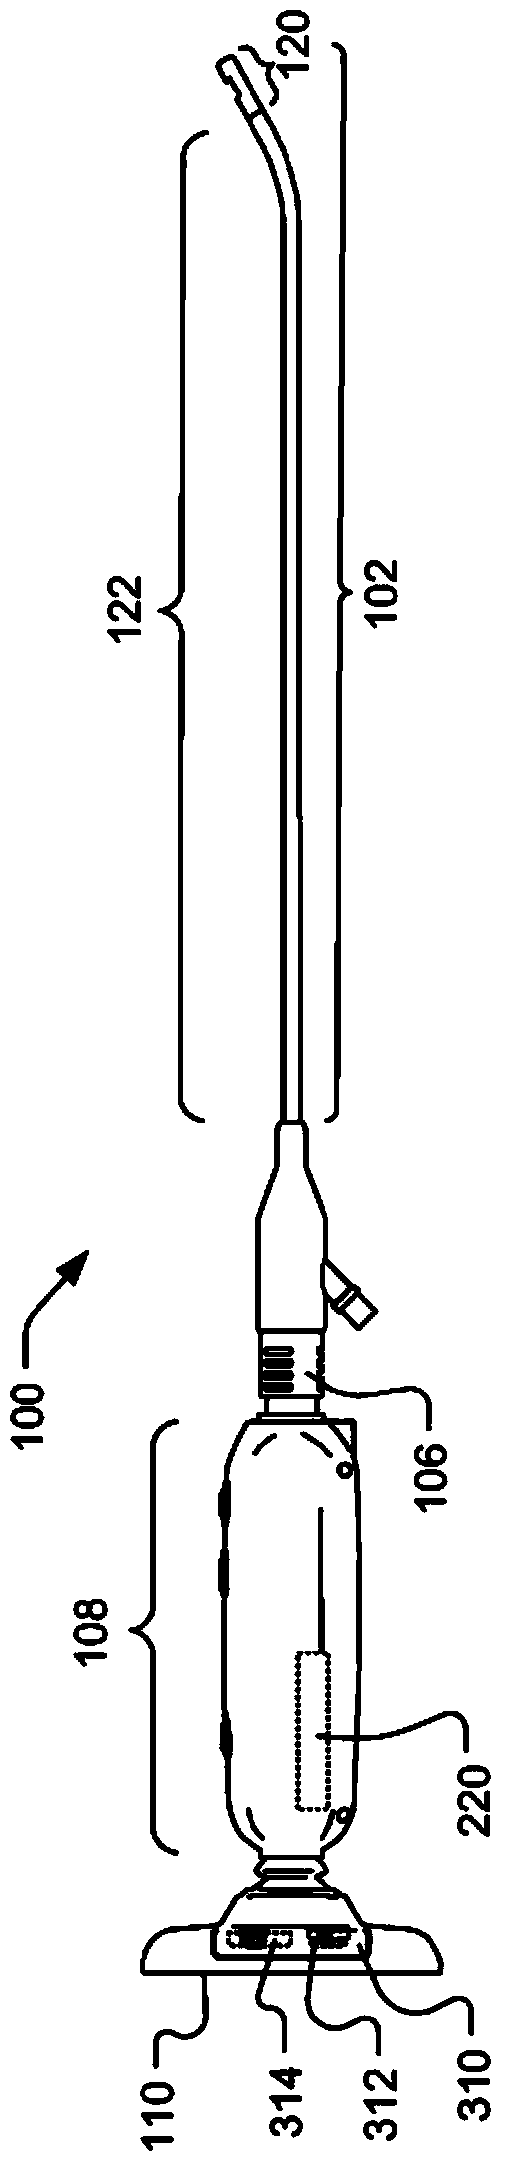 Method and apparatus for hysteroscopy and endometrial biopsy